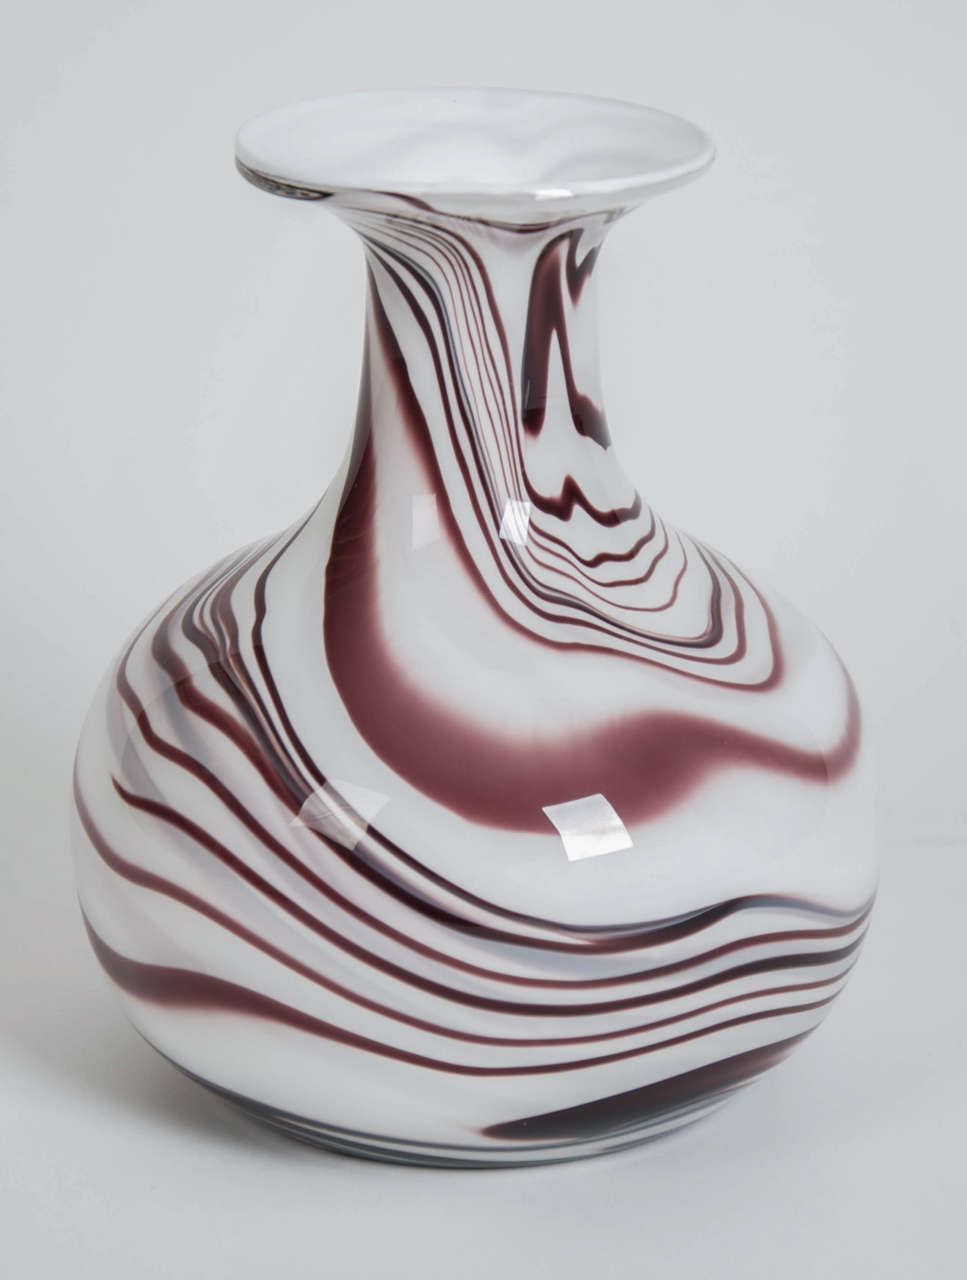 A beautiful vintage 1970s Carlo Moretti maroon and white waves glass vase. 

By Carlo Moretti
